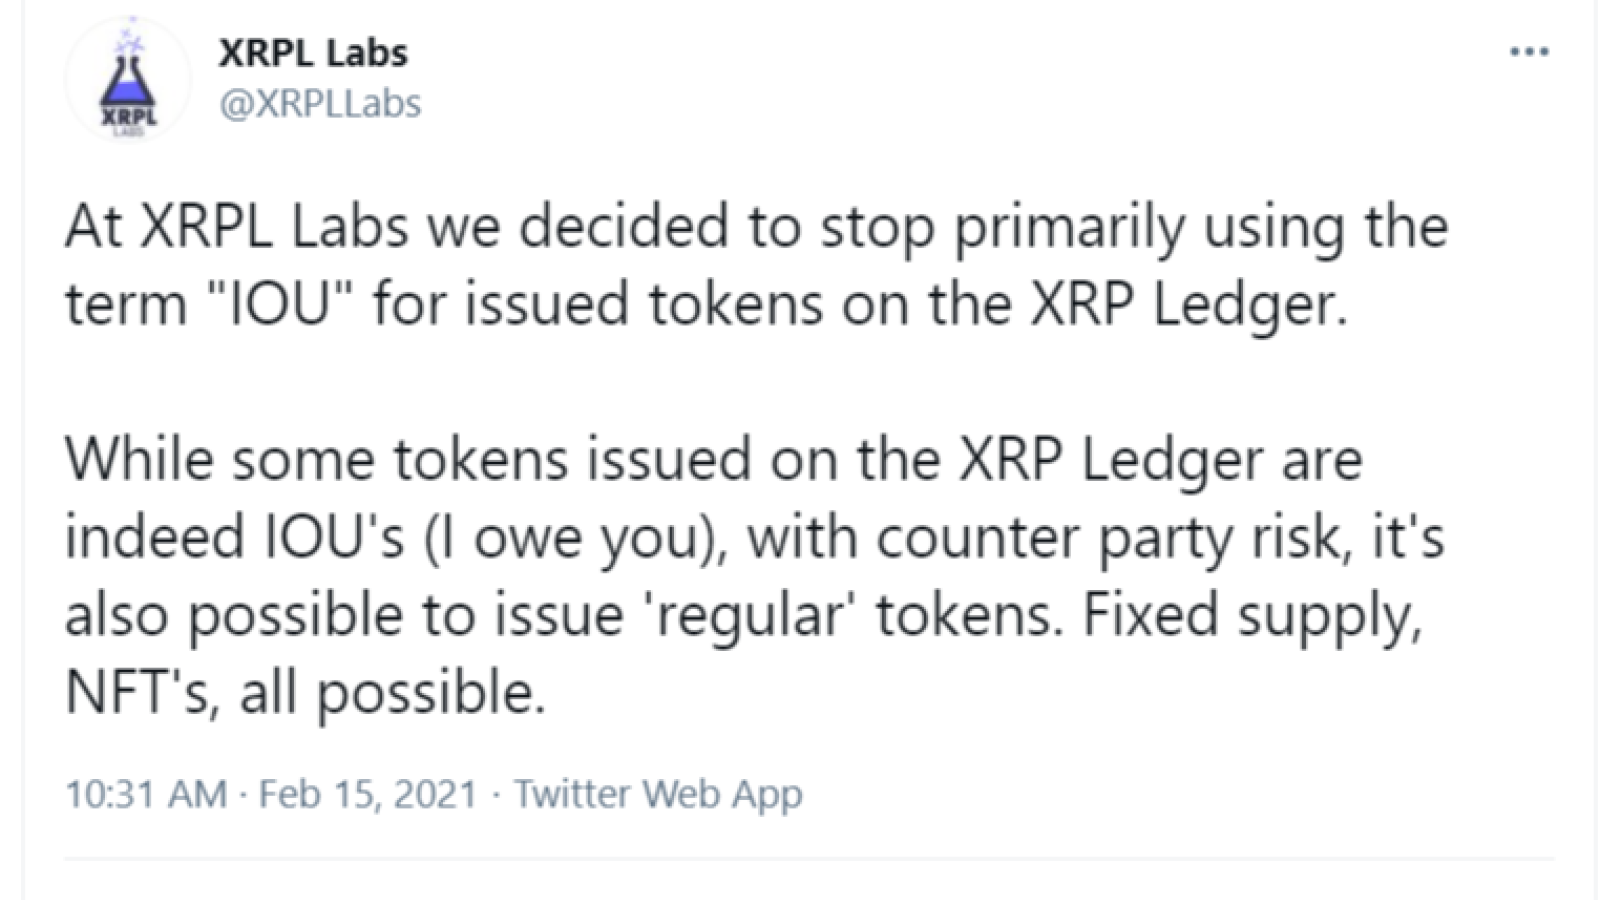 XRPL Labs: not all assets on XRP Ledger are IoUs